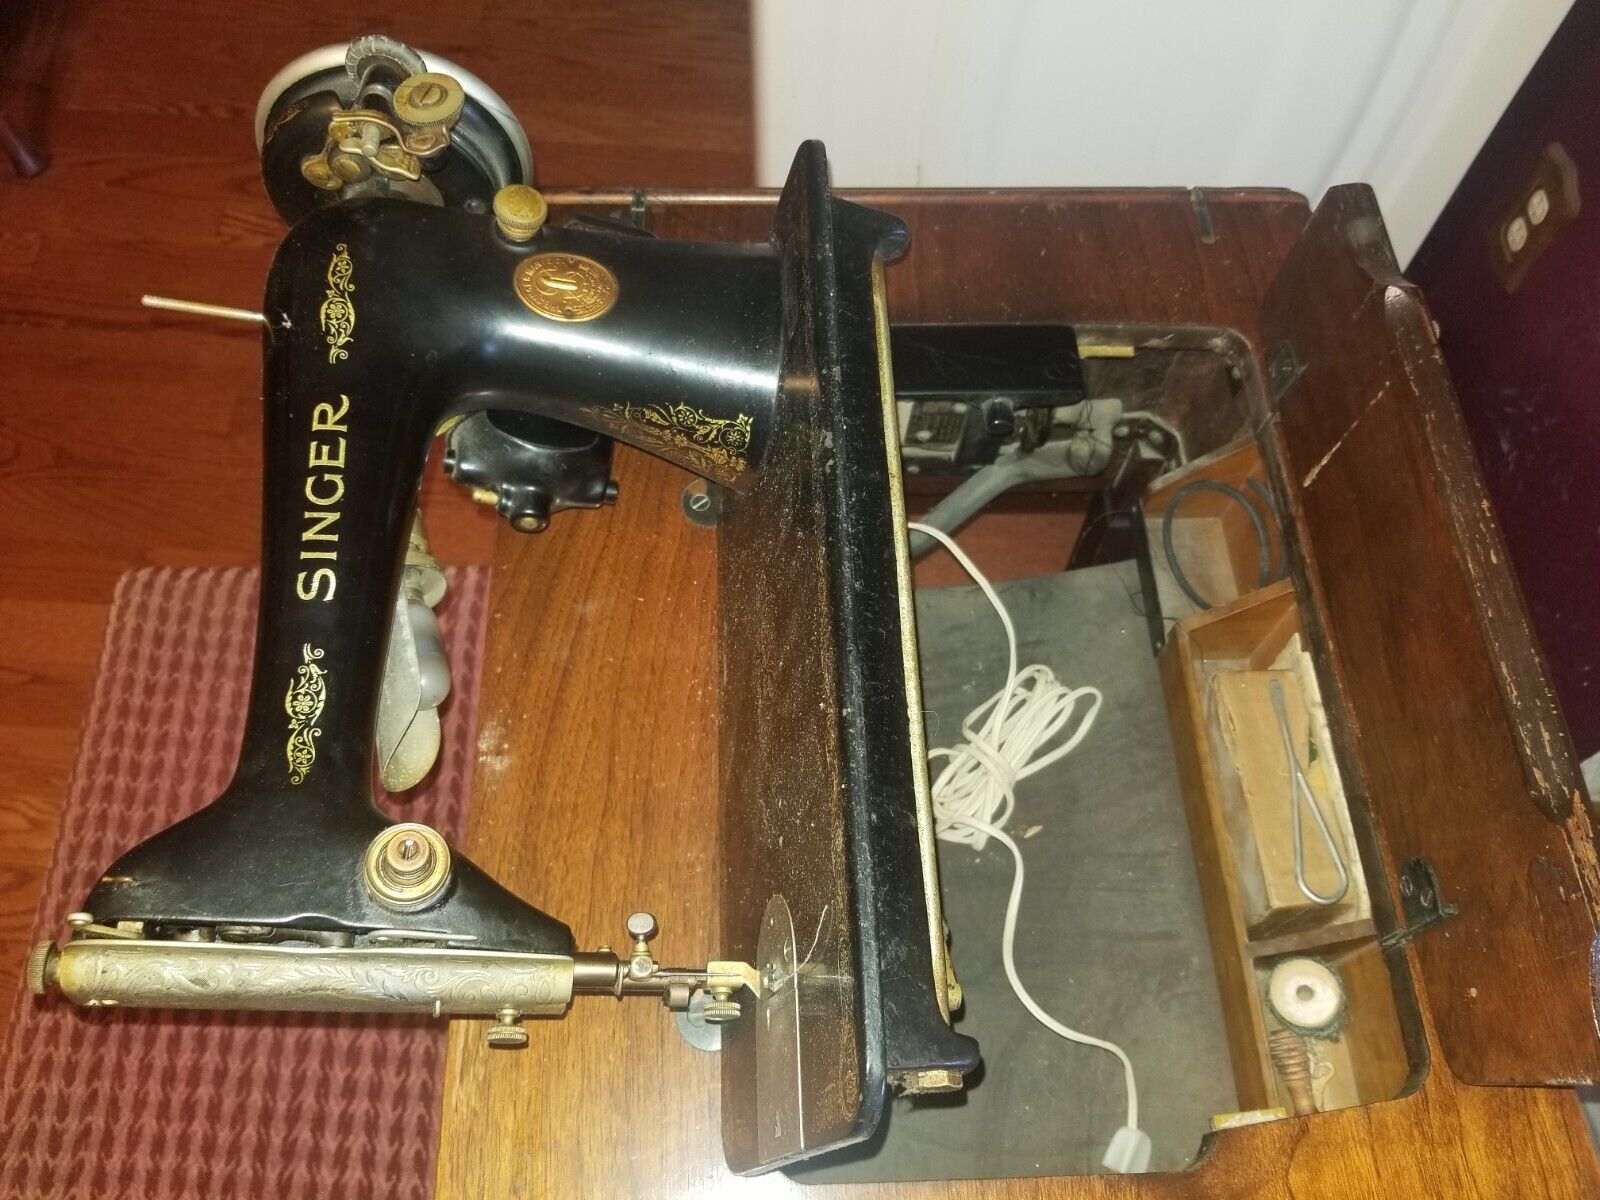 1927 Singer electric sewing machine with table and matching stool